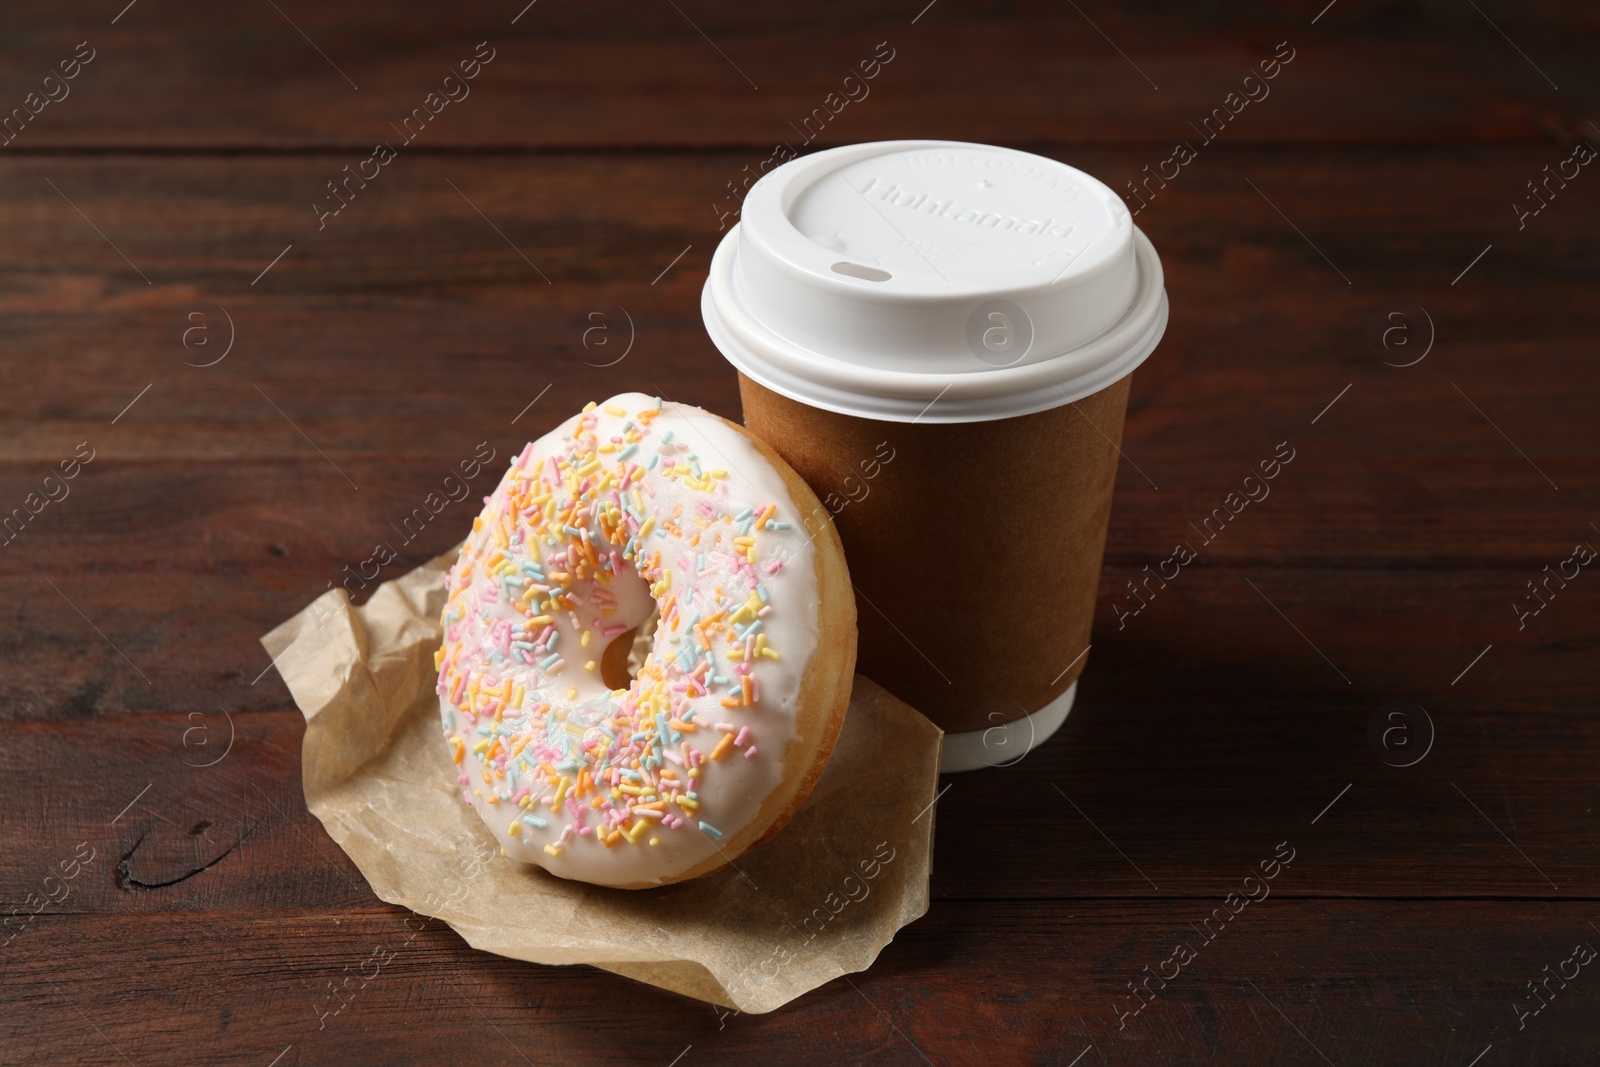 Photo of Yummy donut and paper cup on wooden table